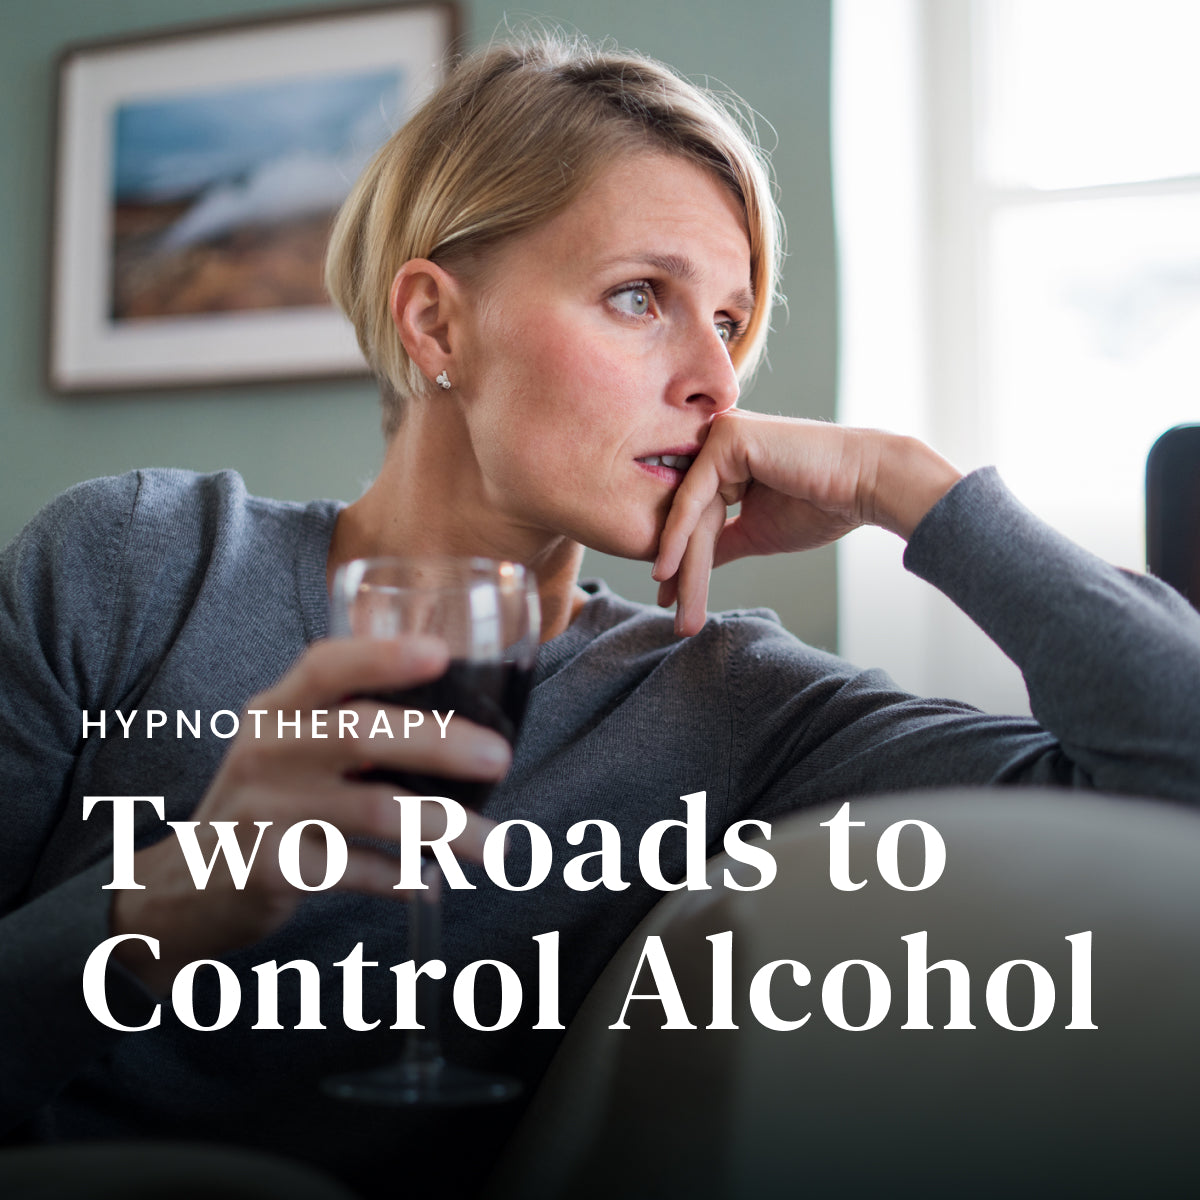 Two Roads to Control Alcohol